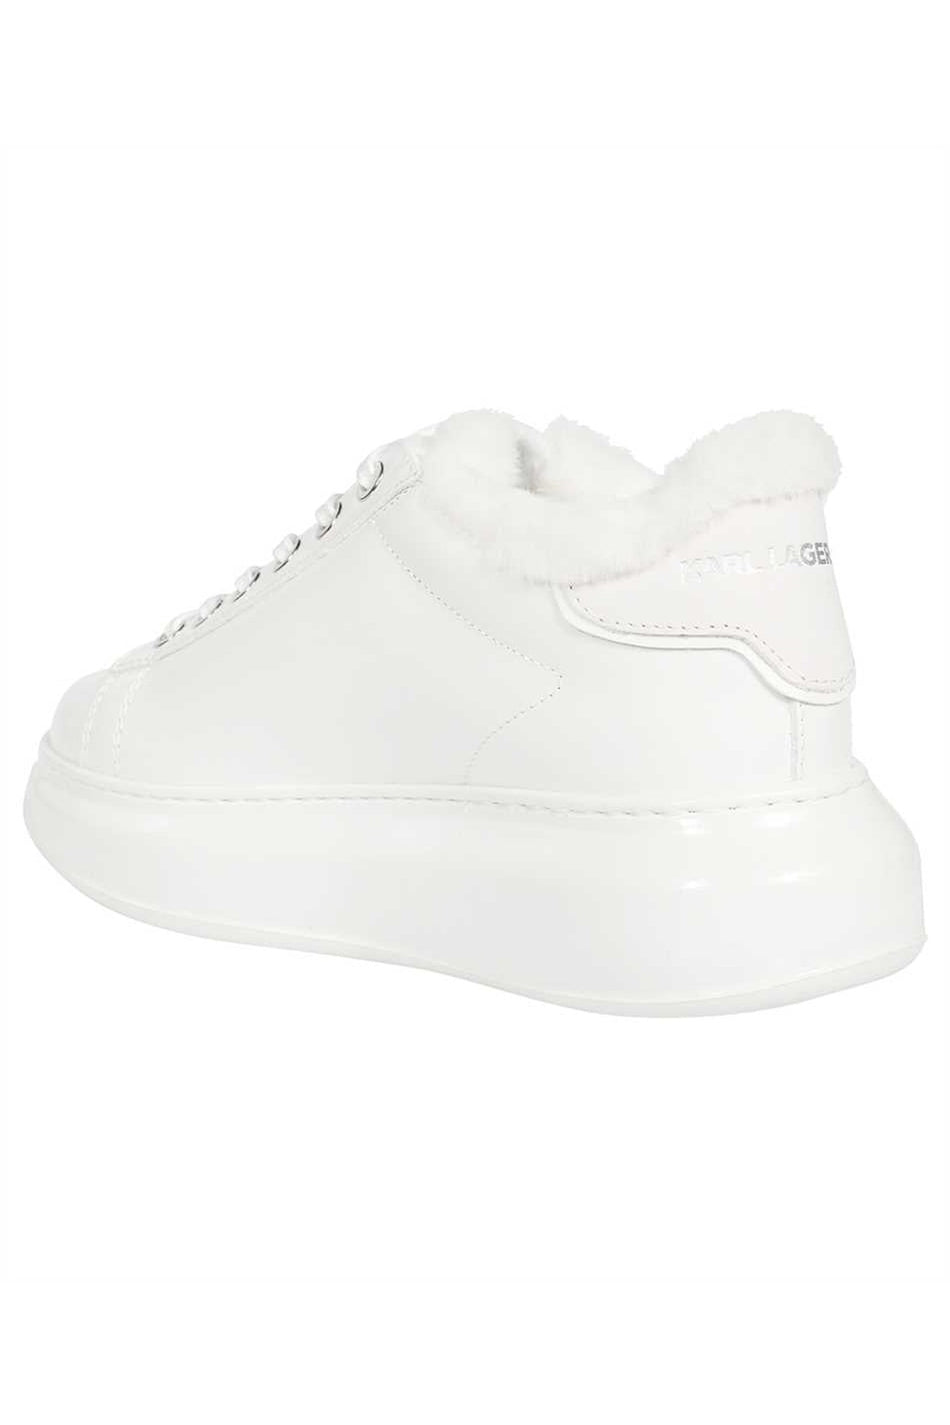 Low-top sneakers-Karl Lagerfeld-OUTLET-SALE-35-ARCHIVIST